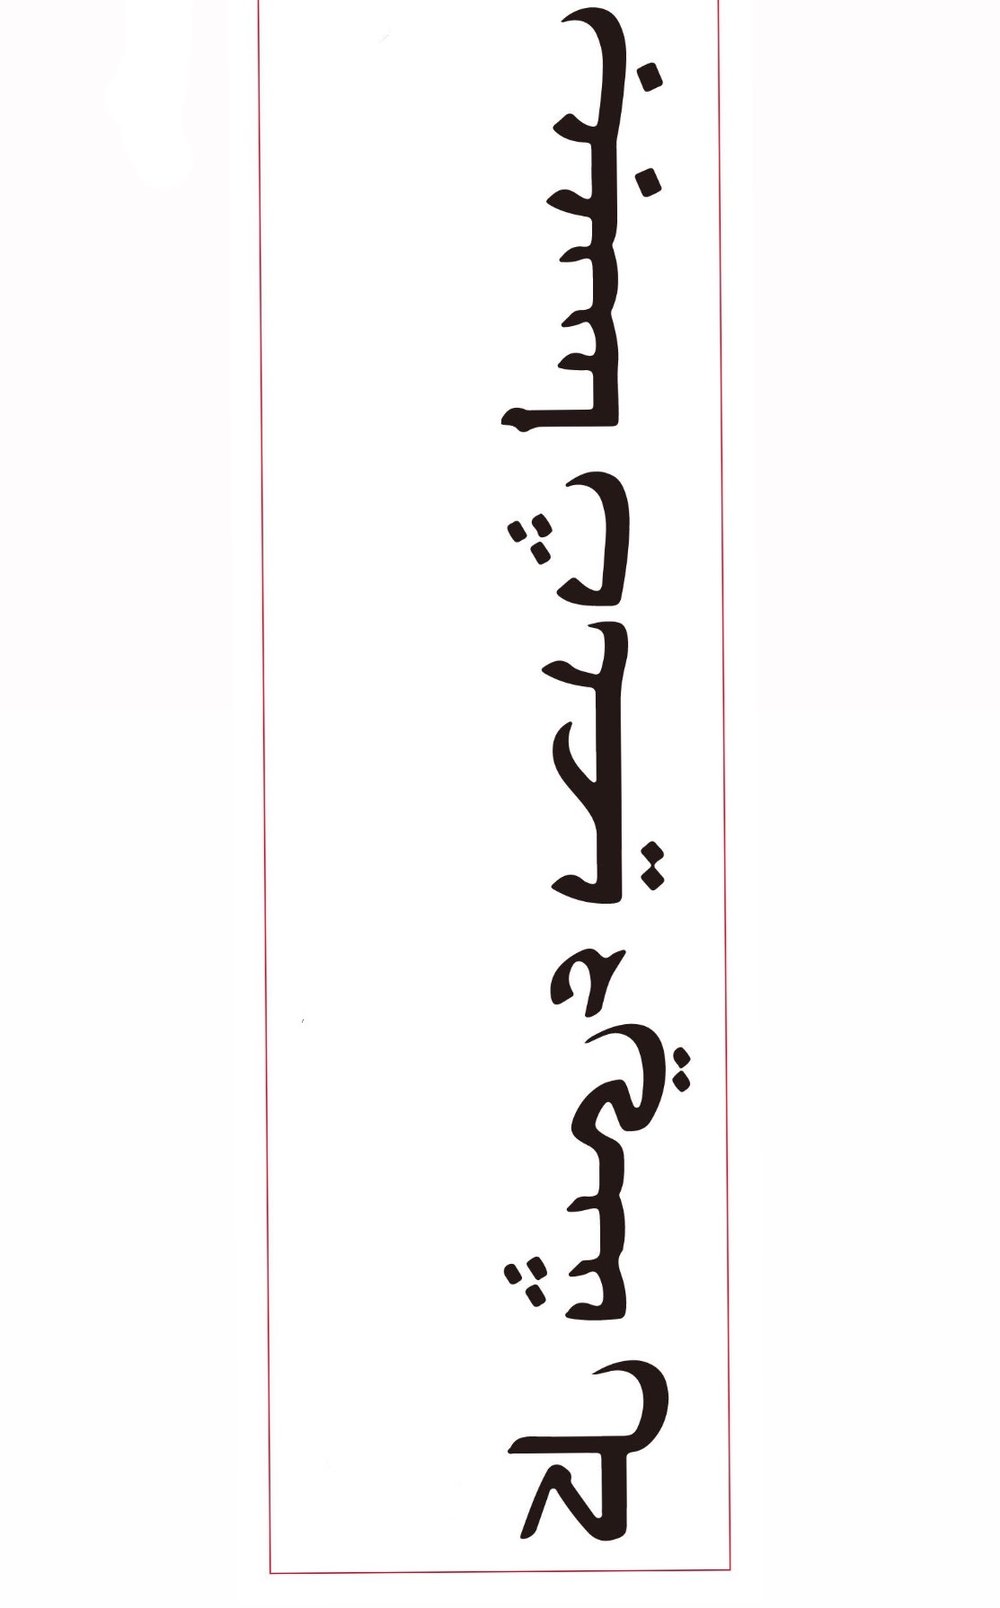 T.O.T back arabic tattoo (available in black & red)